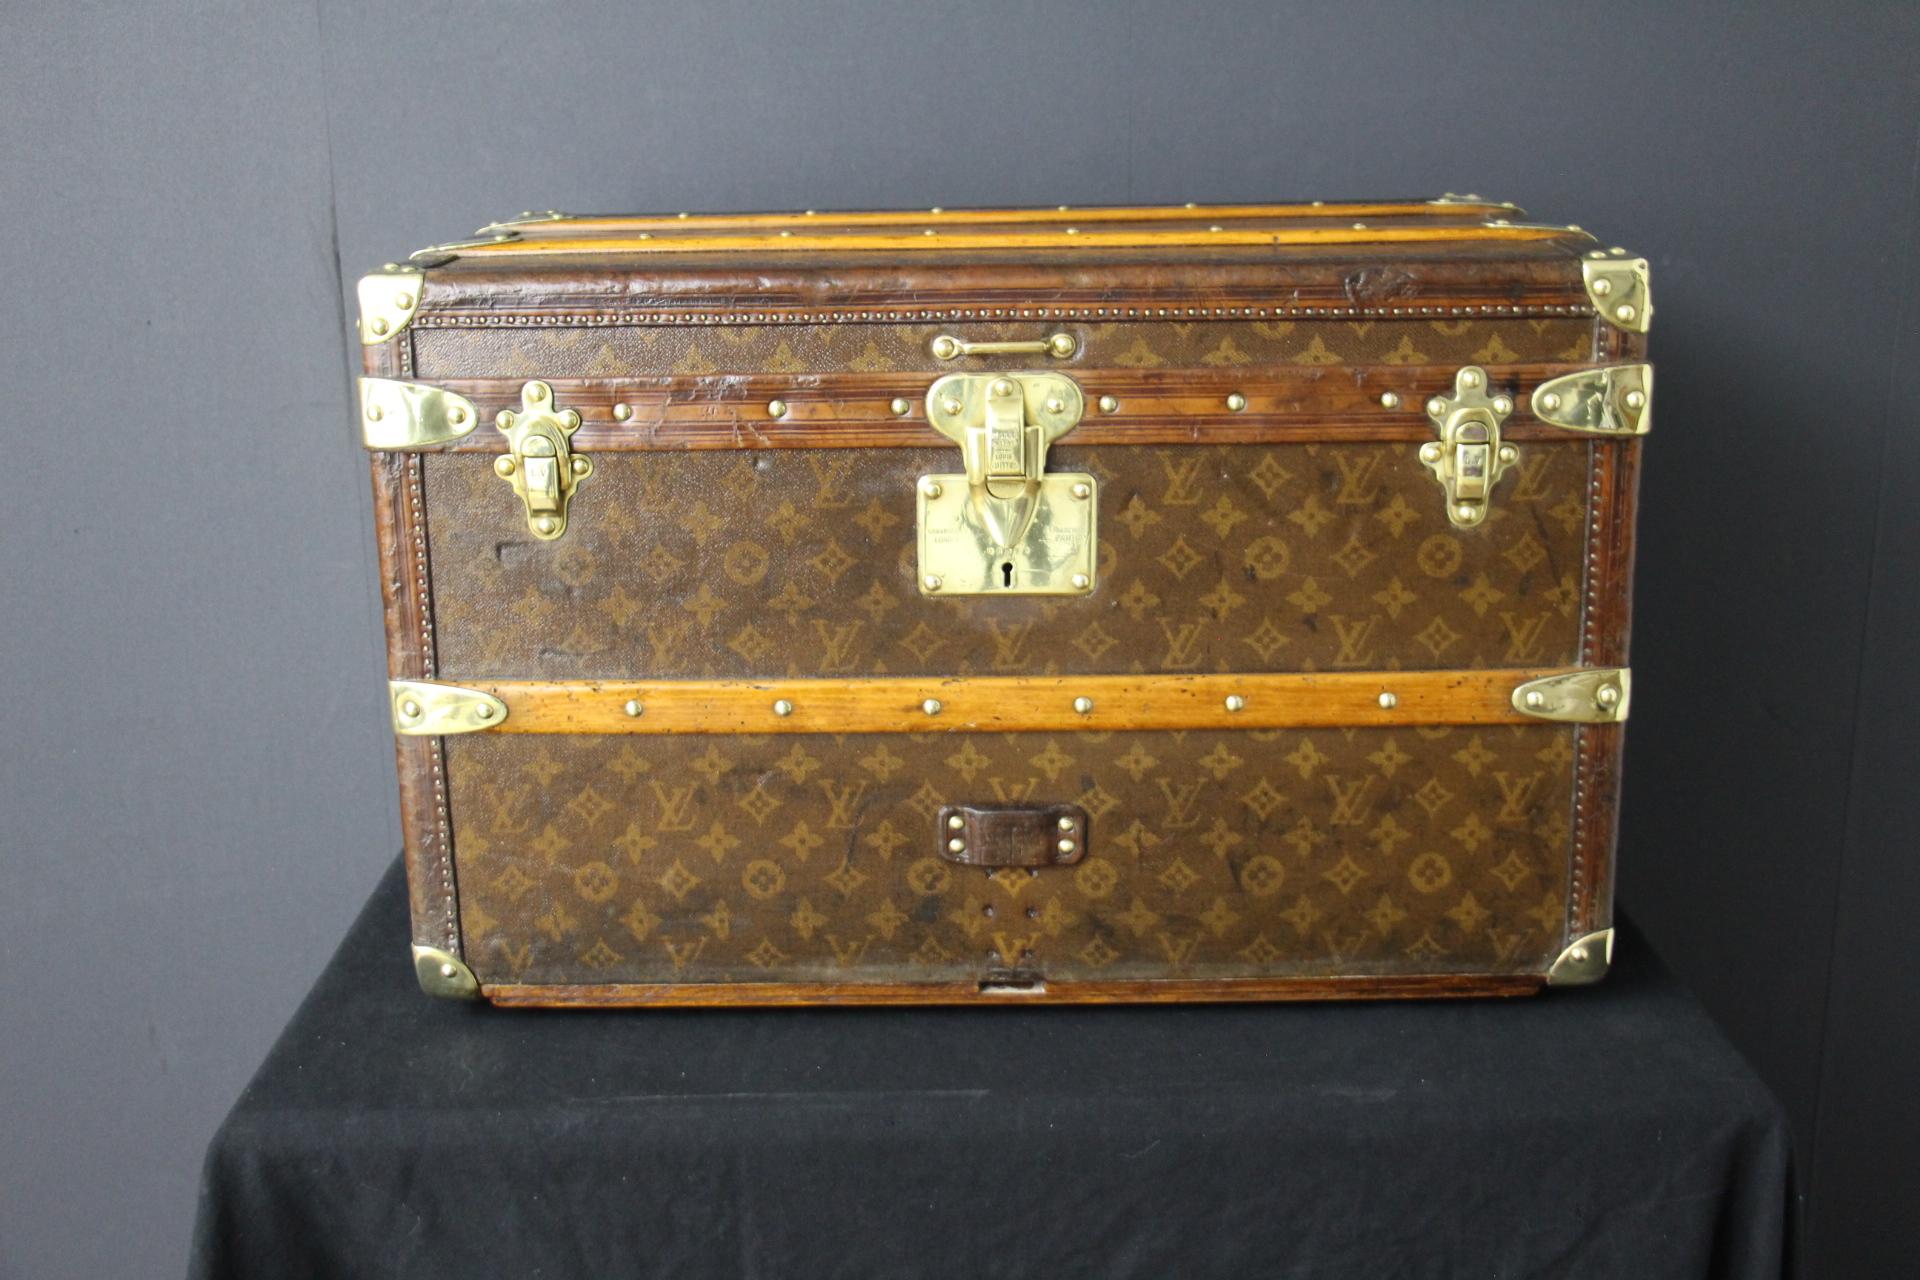 This lovely little Louis Vuitton steamer trunk features stenciled monogram, all chocolate color leather trim, solid brass corners, locks, and side handles. Its brass locks, studs and side handles are all marked Louis Vuitton.
It has got a very warm